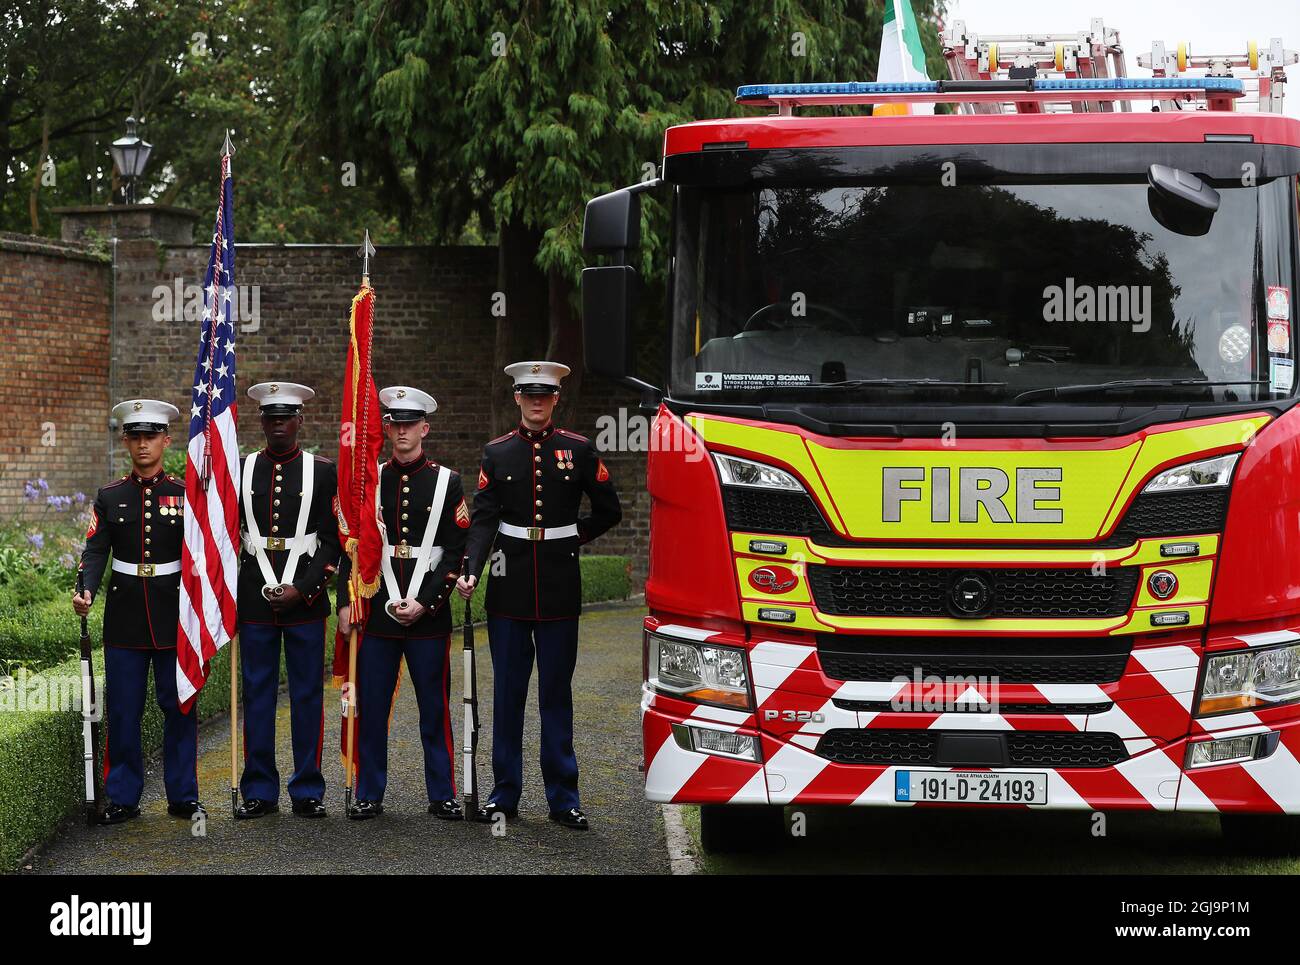 US Marines (from left) Sgt Jhudiel Rabara, Sgt Wagner Paul Jr., Sgt Mitch Shurtliff, and LCpl Kevin Sharp, during a 20th anniversary event at the US Ambassador's Residence in Dublin to commemorate the lives lost during the 9/11 attacks. Picture date: Wednesday August 25, 2021. Stock Photo